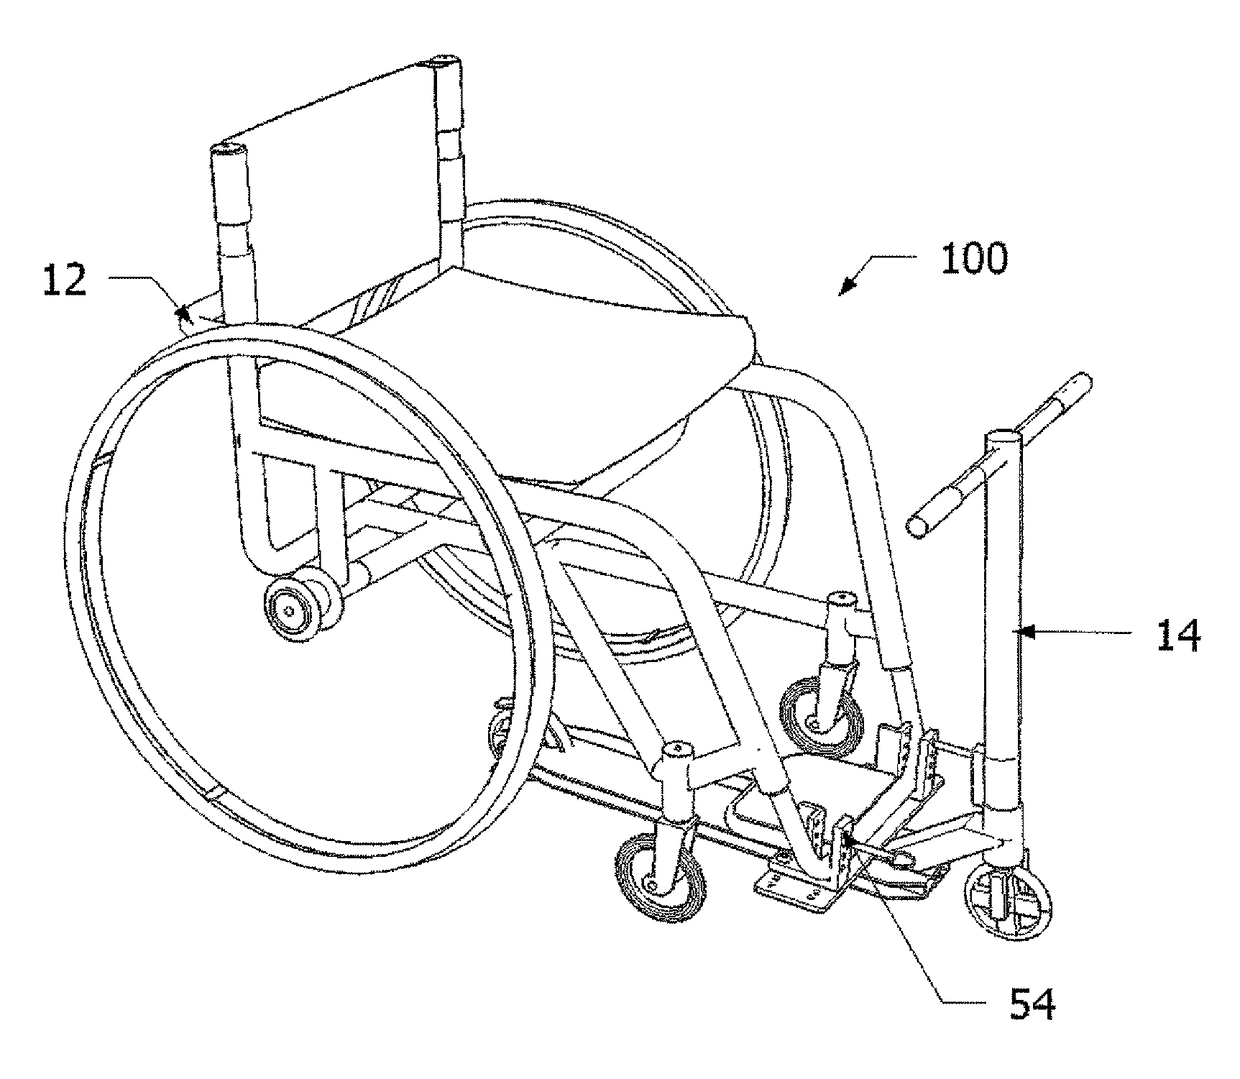 Adjustable device for attaching a manual wheelchair to a scooter